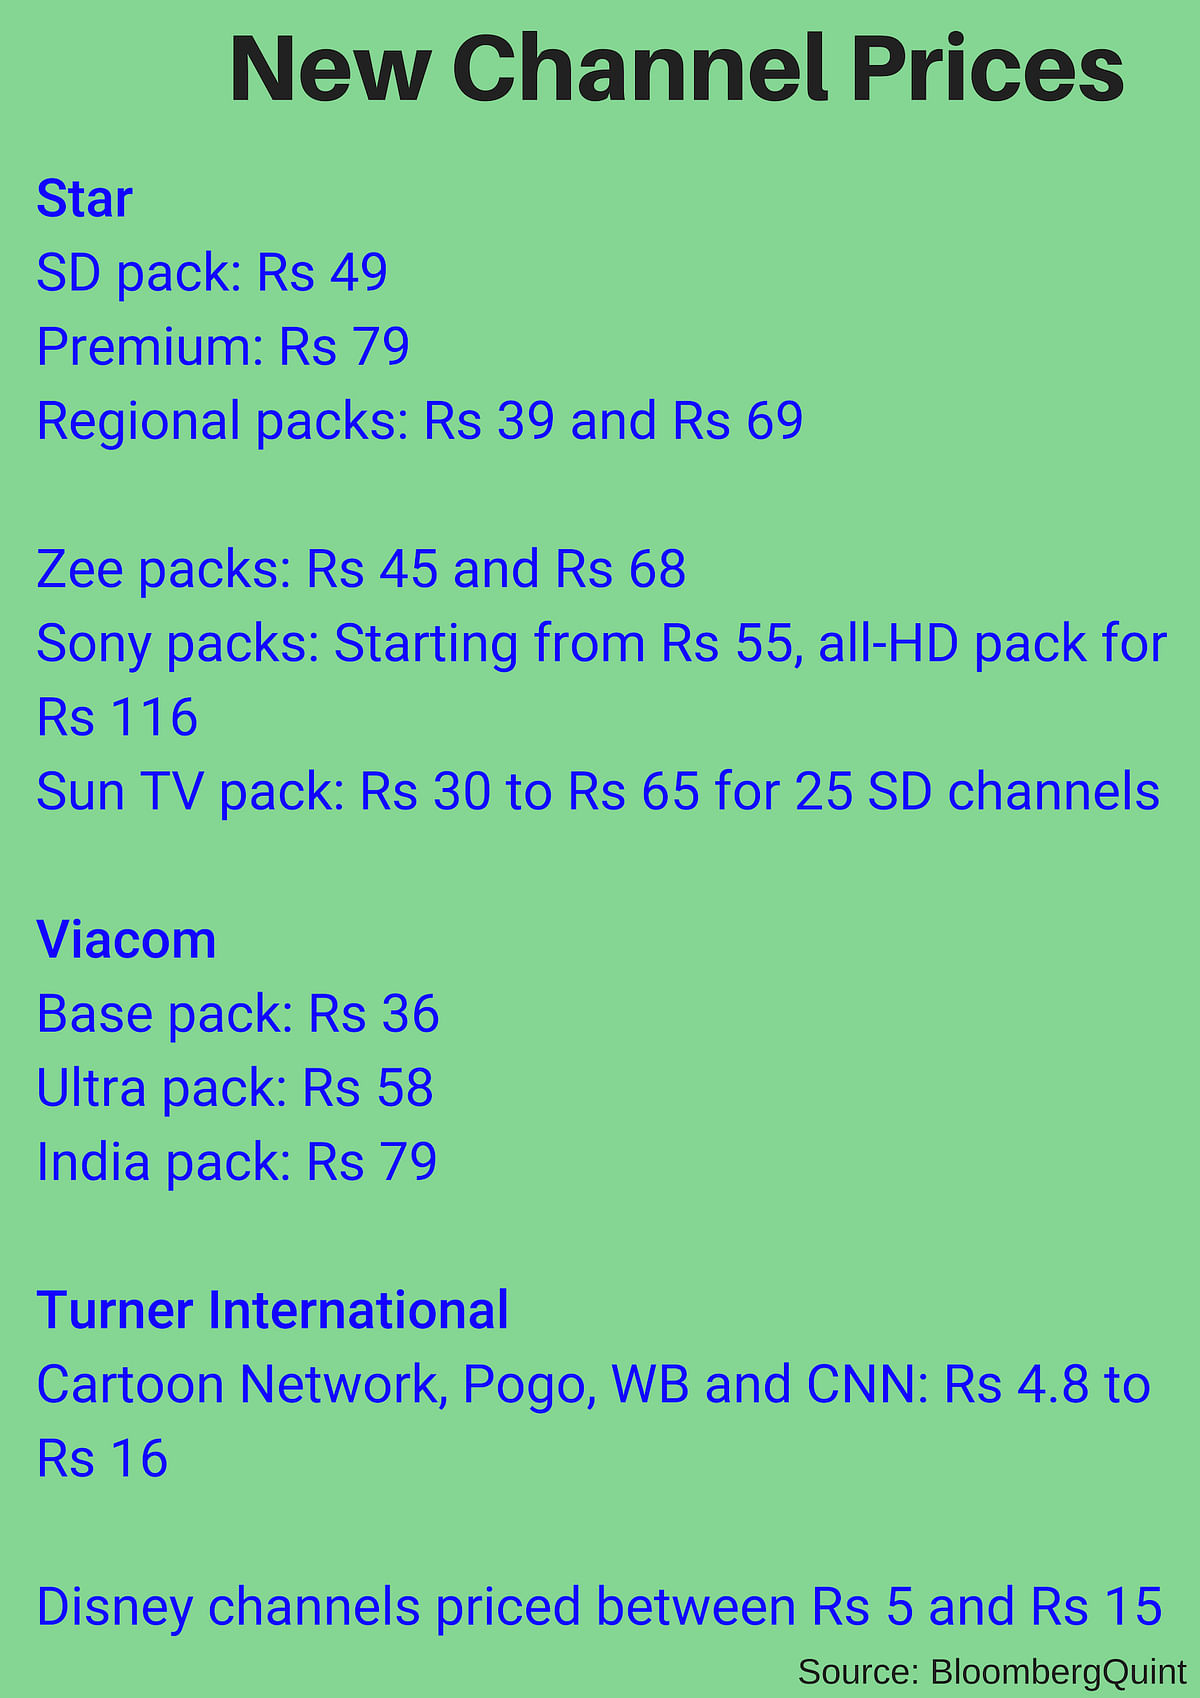 The new channel pricing policy released by TRAI will help consumers save on their annual subscription prices.